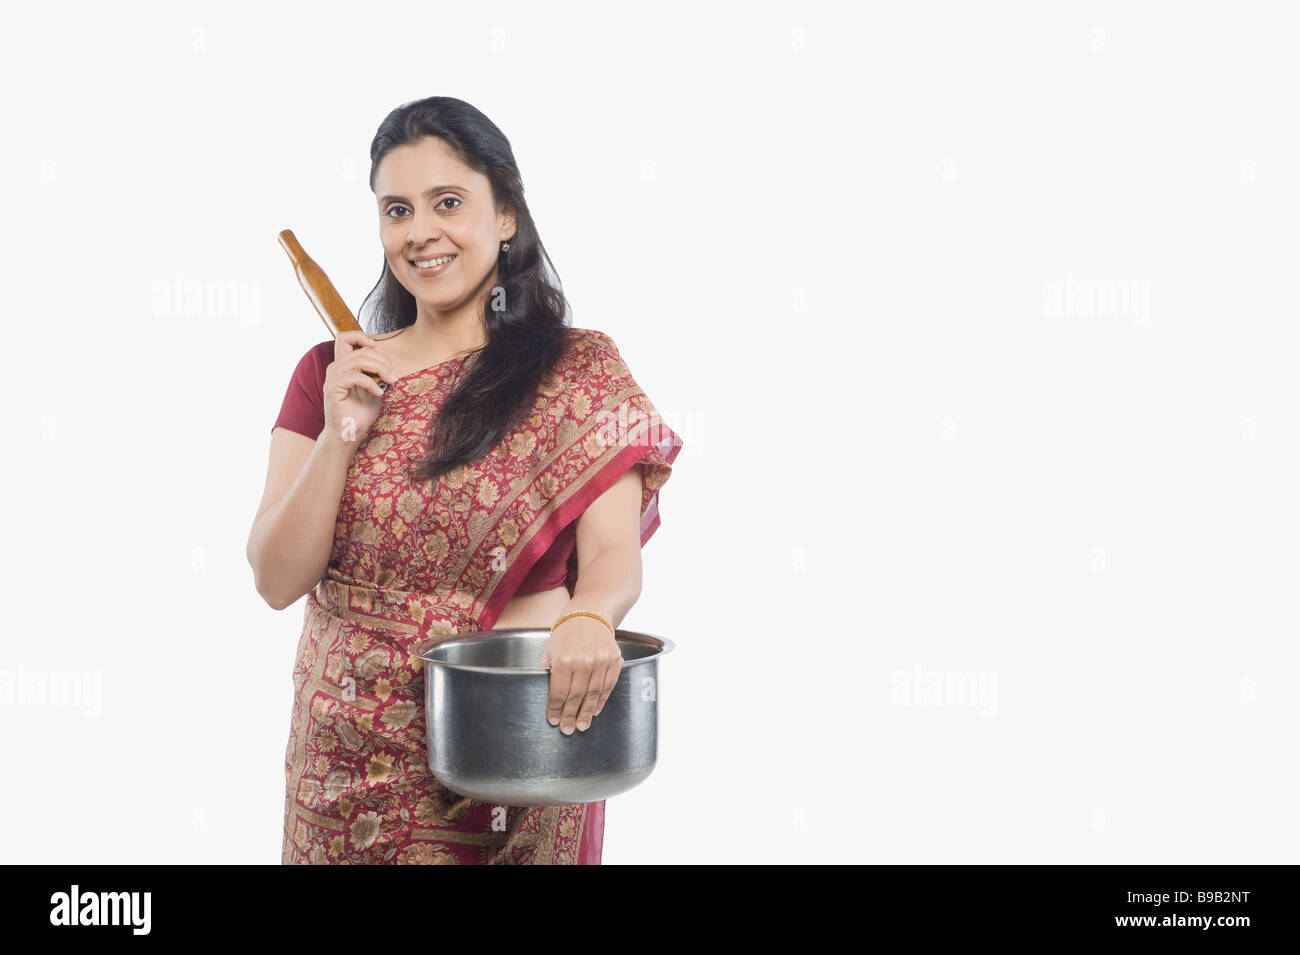 Woman holding a saucepan and a rolling pin Stock Photo